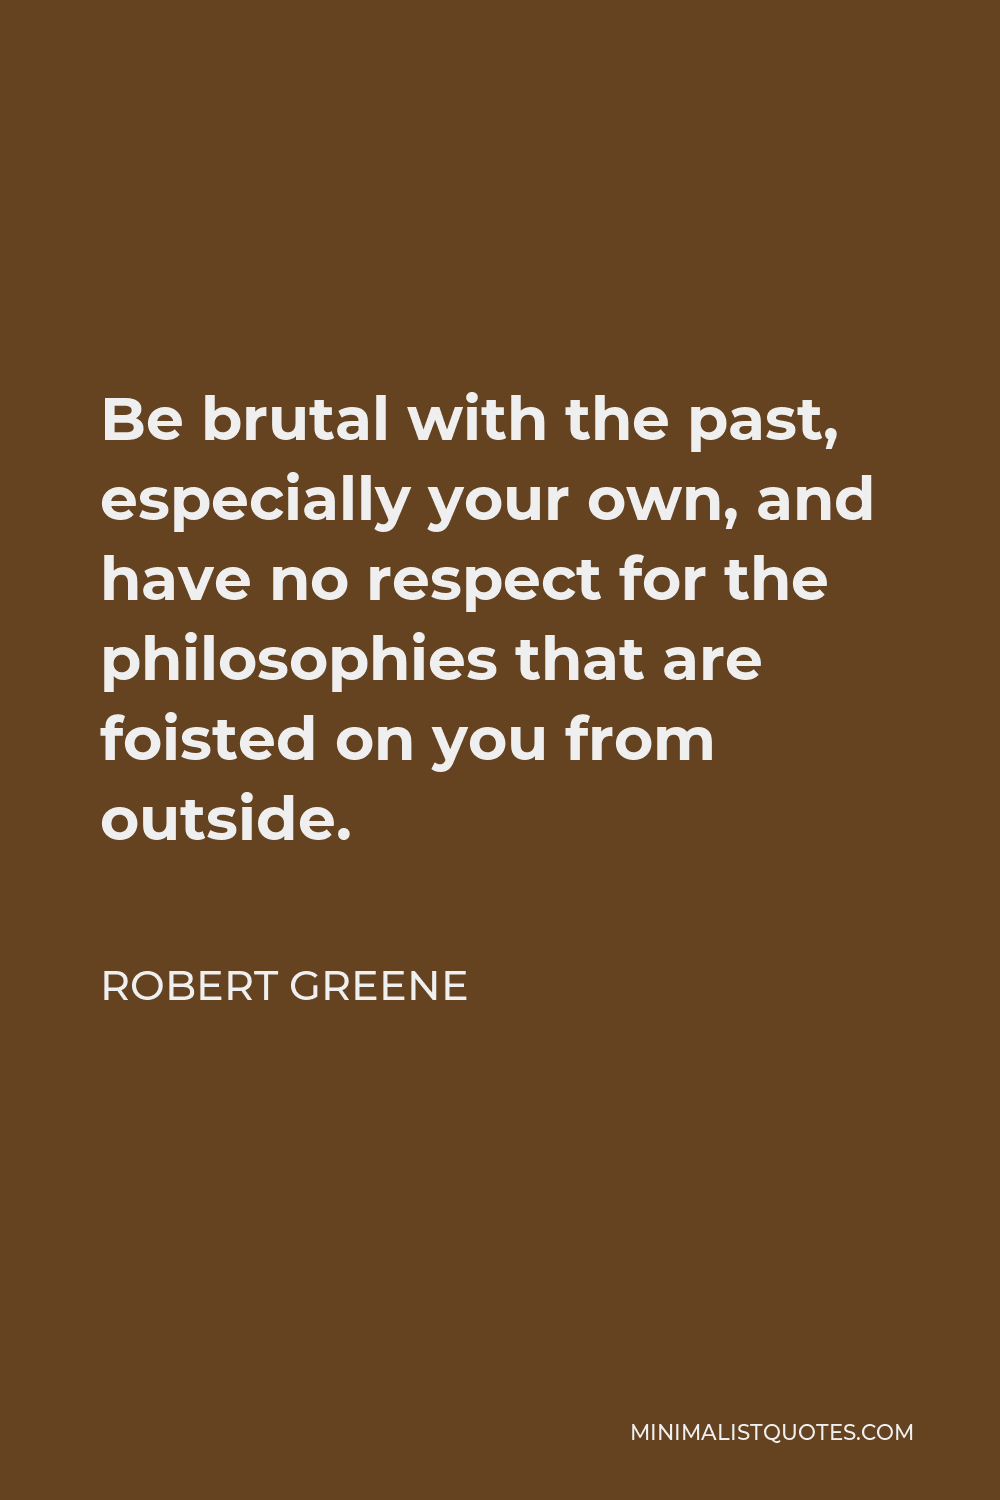 Robert Greene Quote - Be brutal with the past, especially your own, and have no respect for the philosophies that are foisted on you from outside.